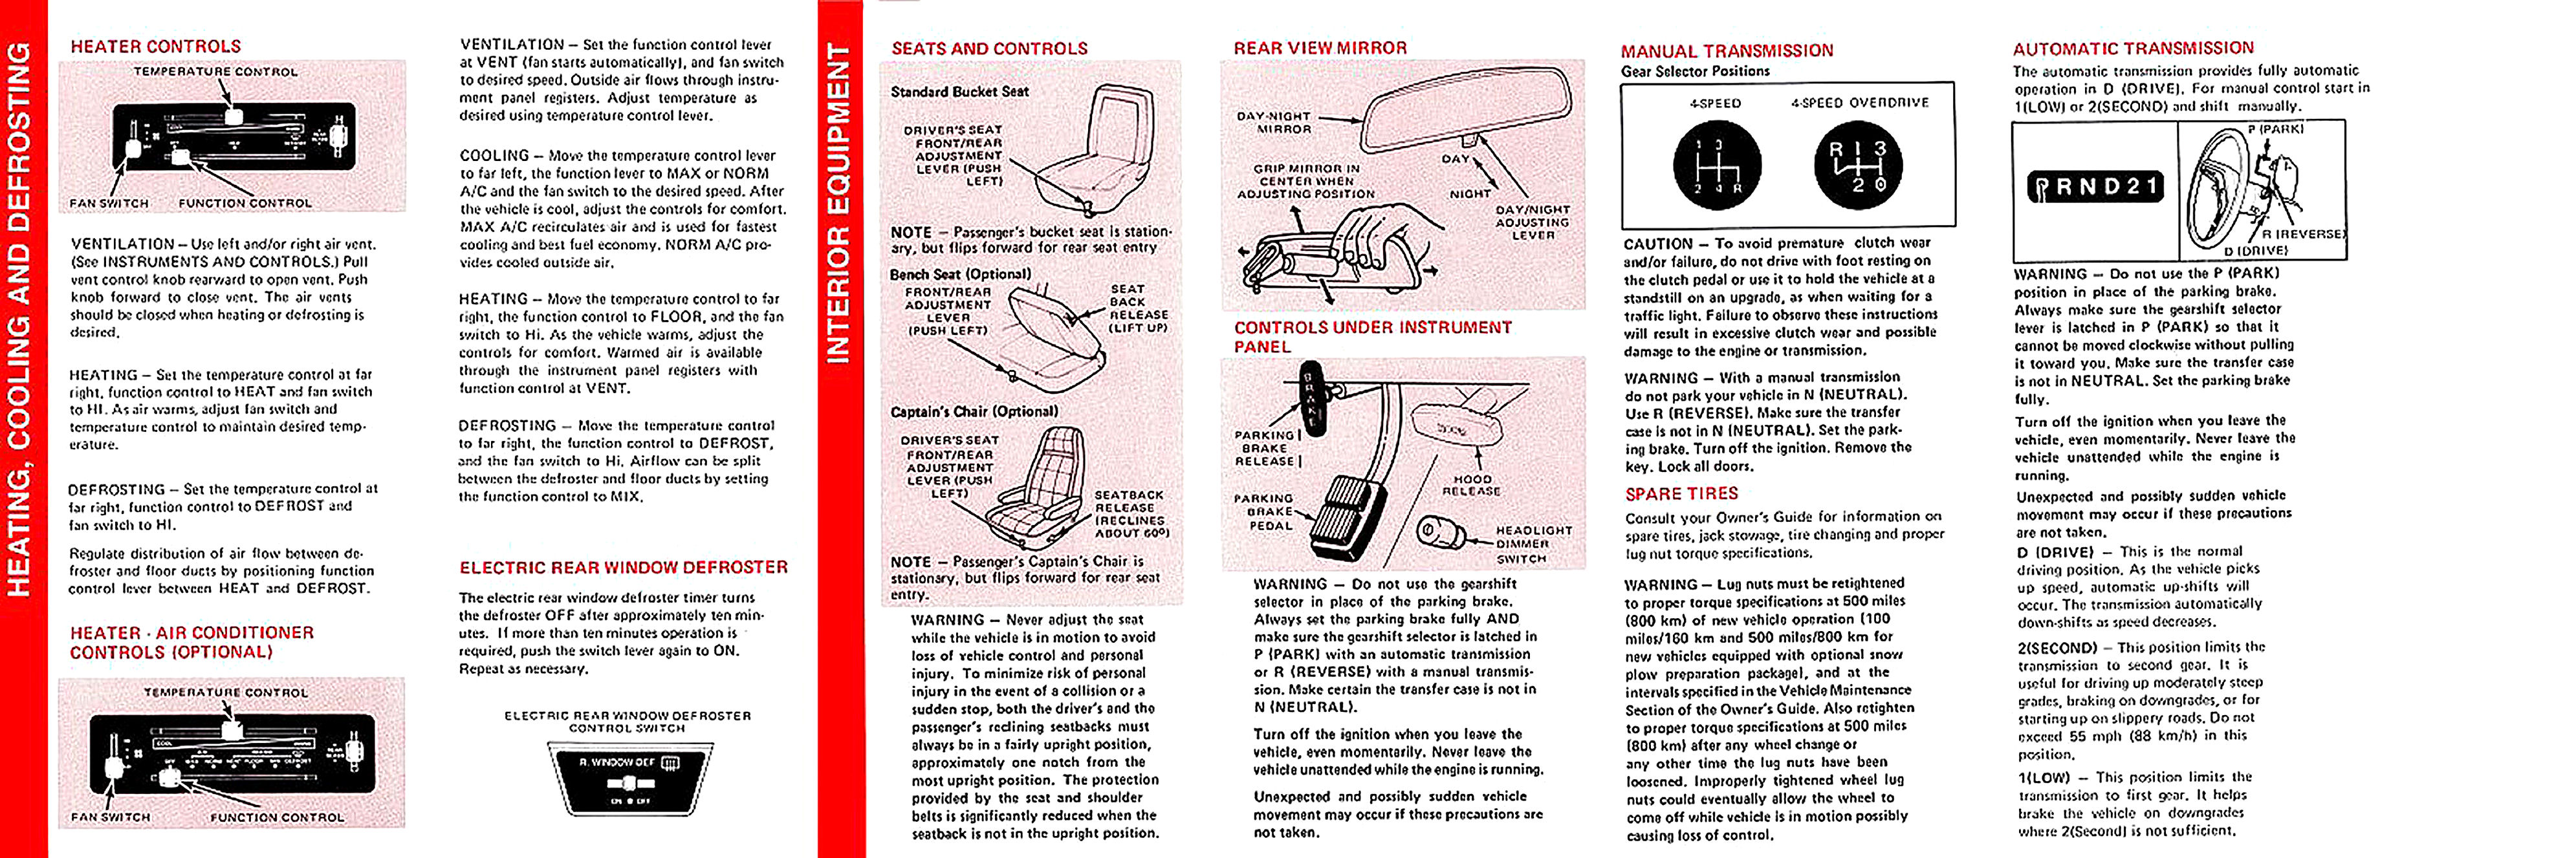 1983_Ford_Bronco_Operating_Guide-02